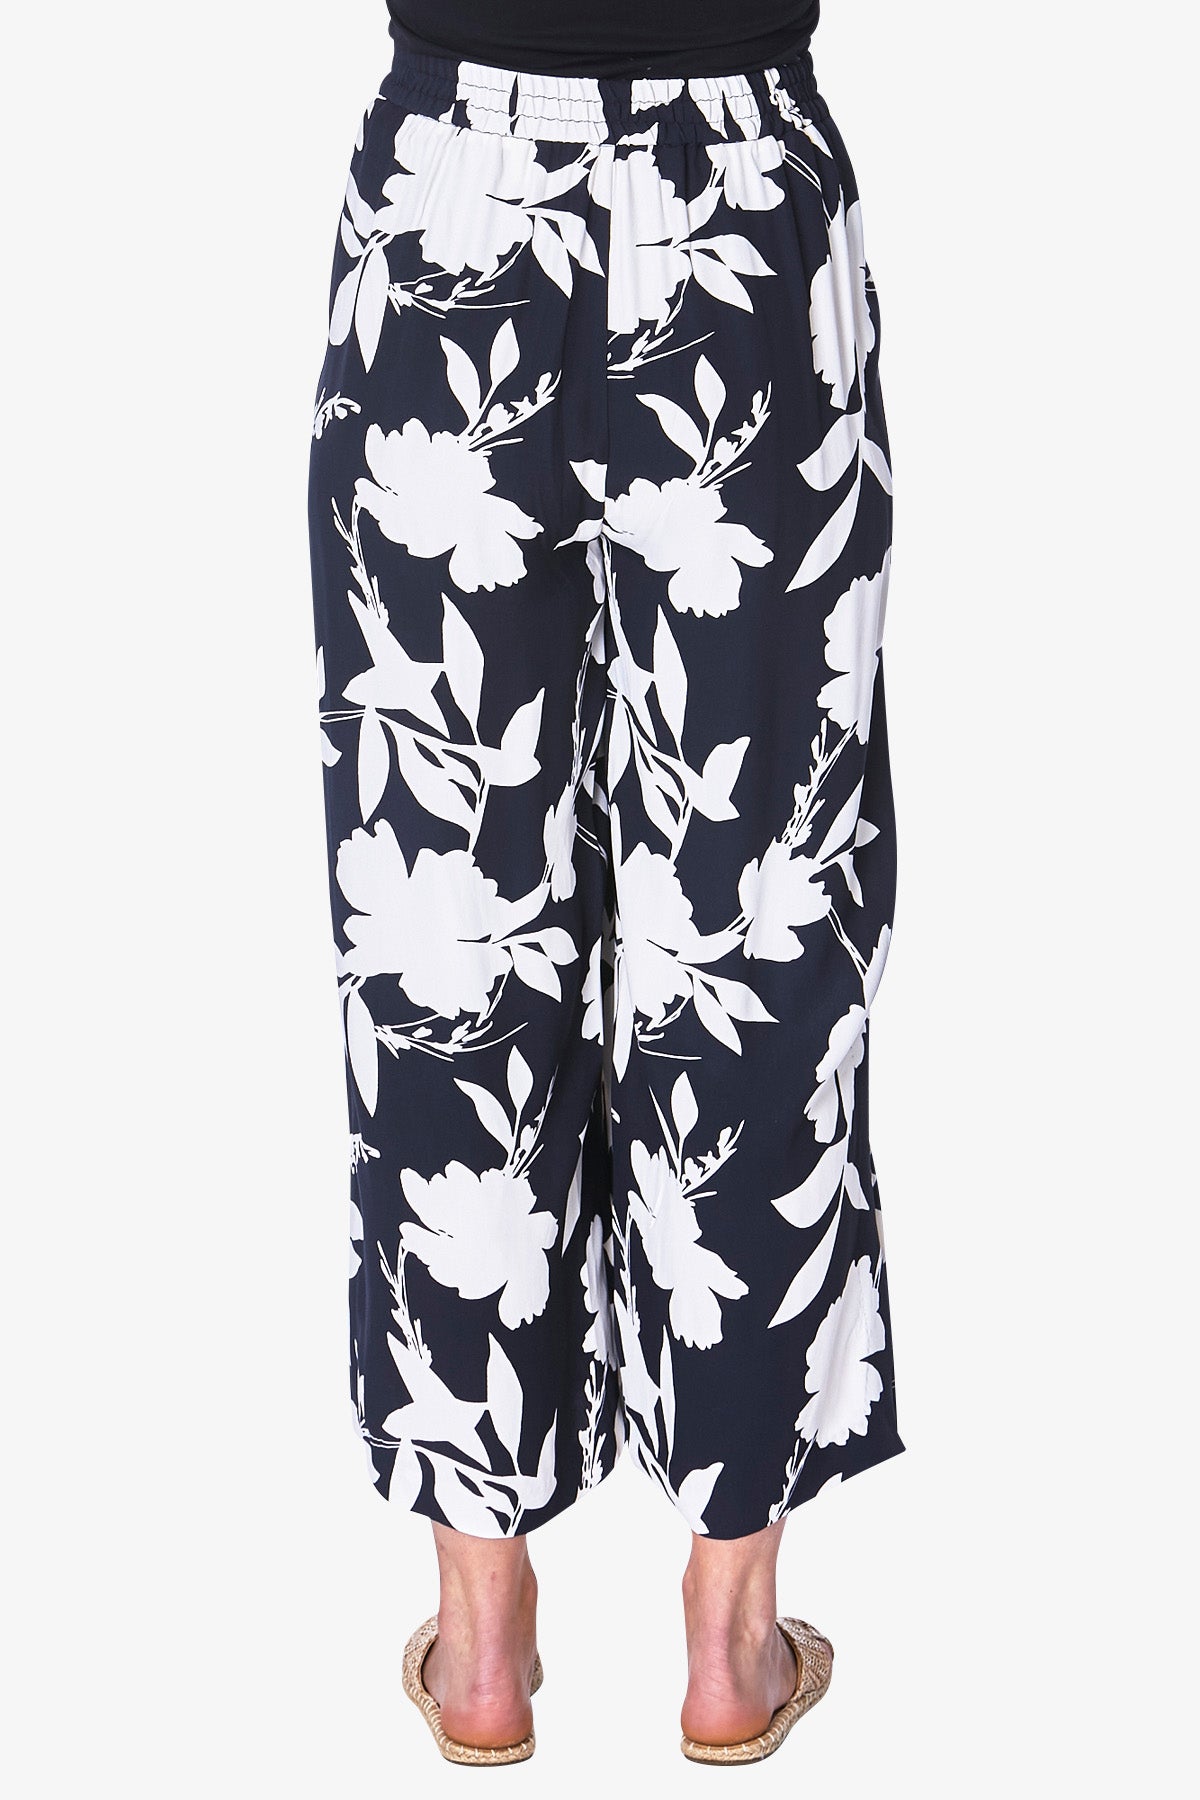 Painted Floral Culottes Black and White